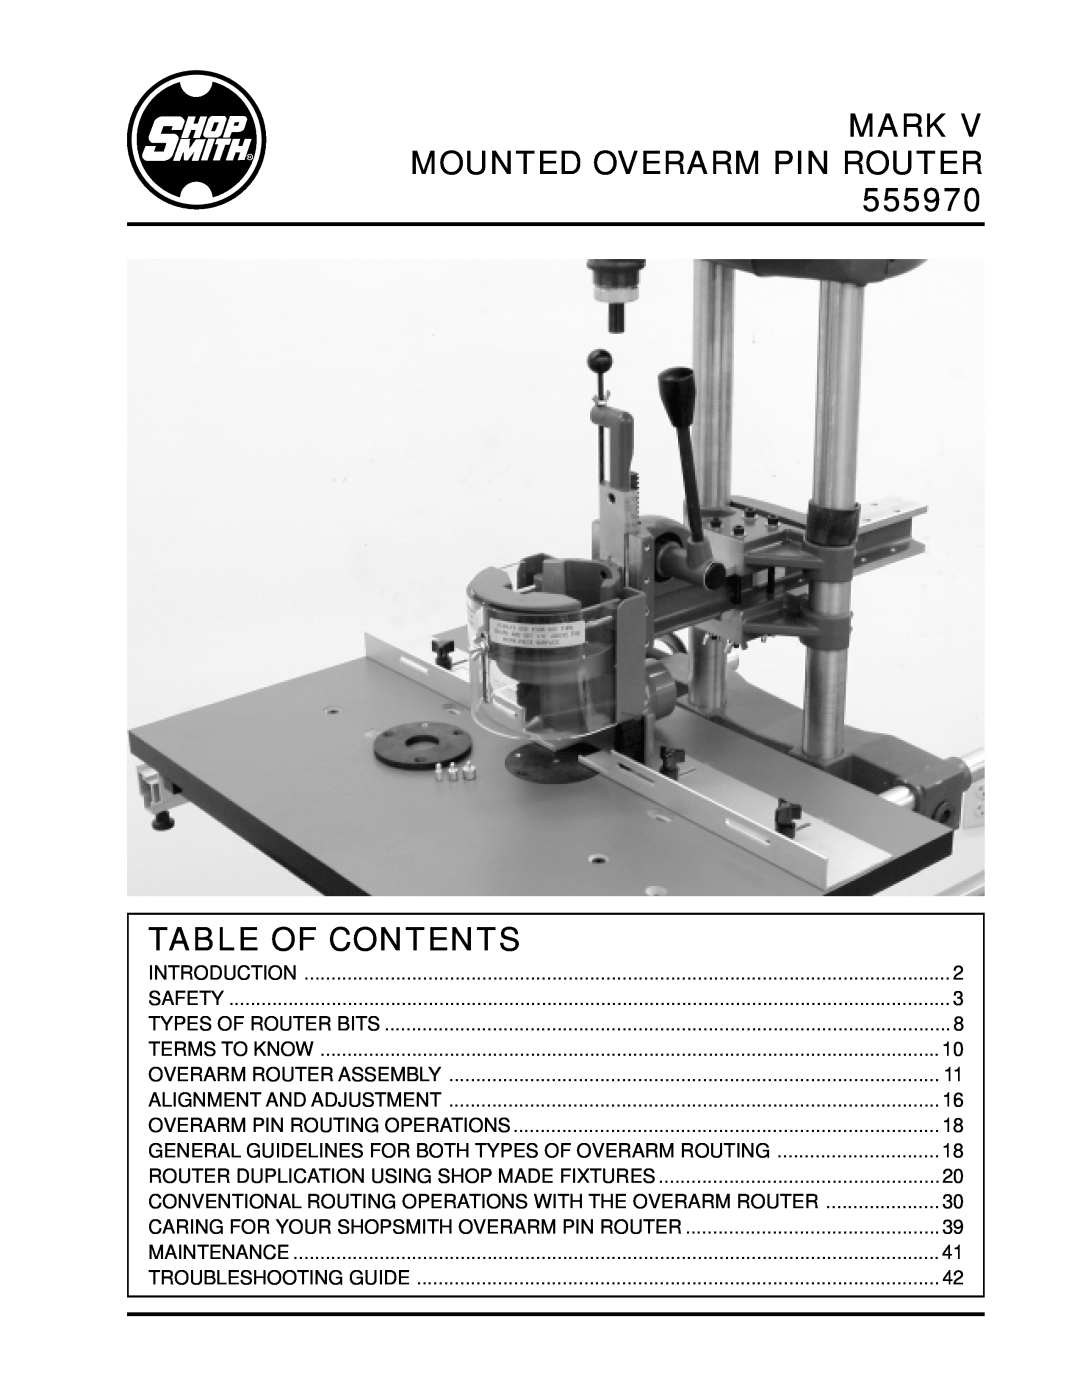 Shopsmith 555970 manual Mark V Mounted Overarm Pin Router, Table Of Contents 